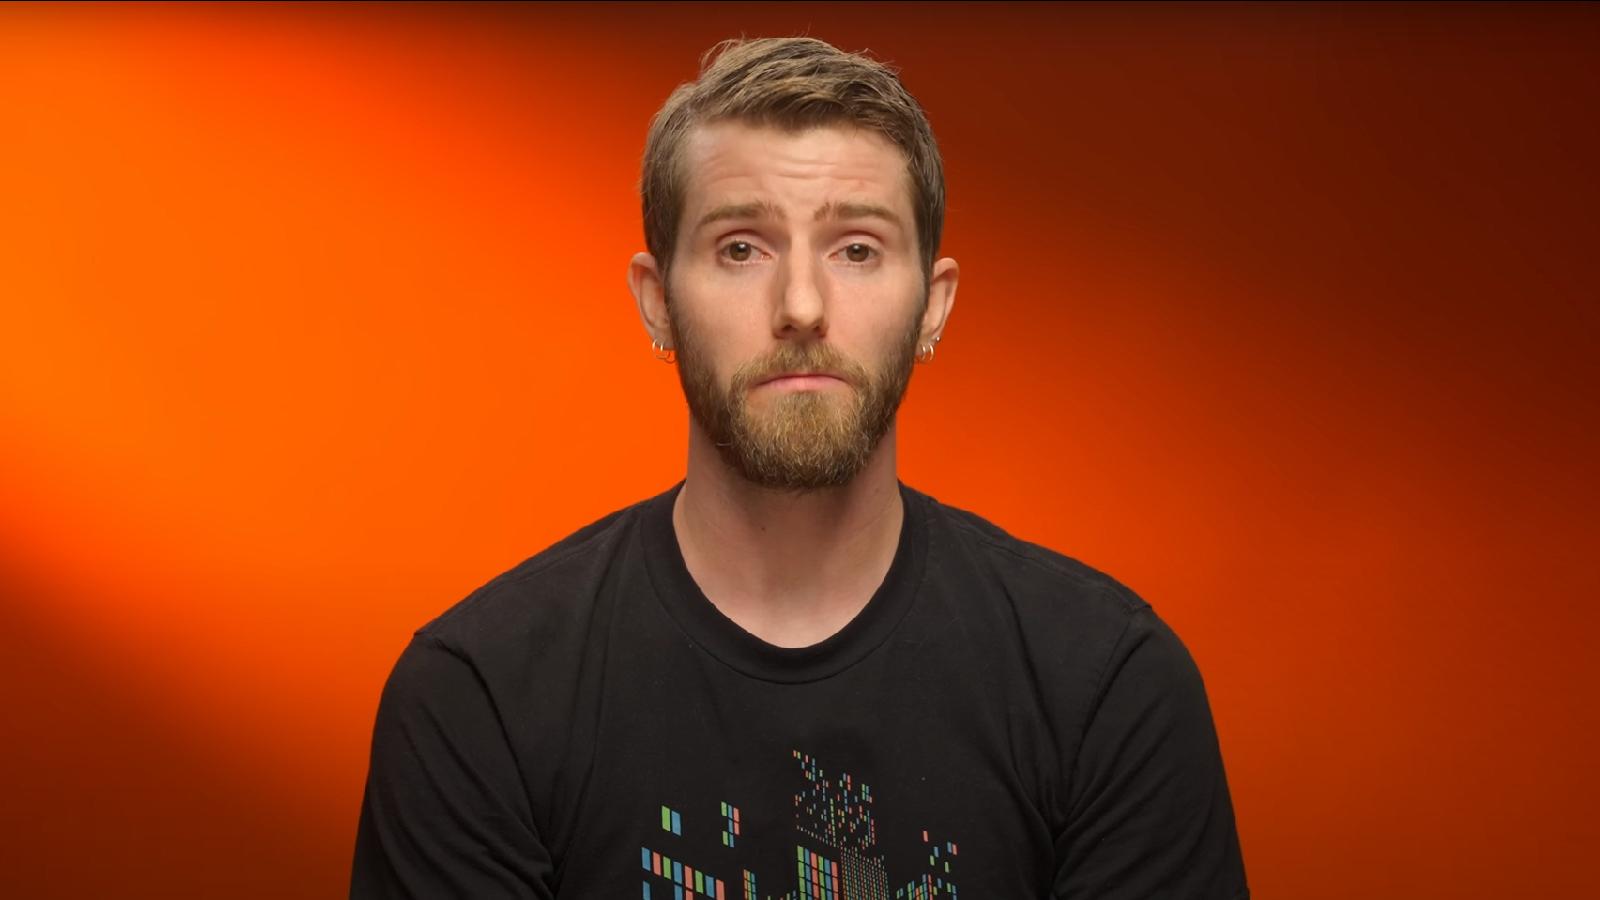 Linus Tech Tips in update video after allegations